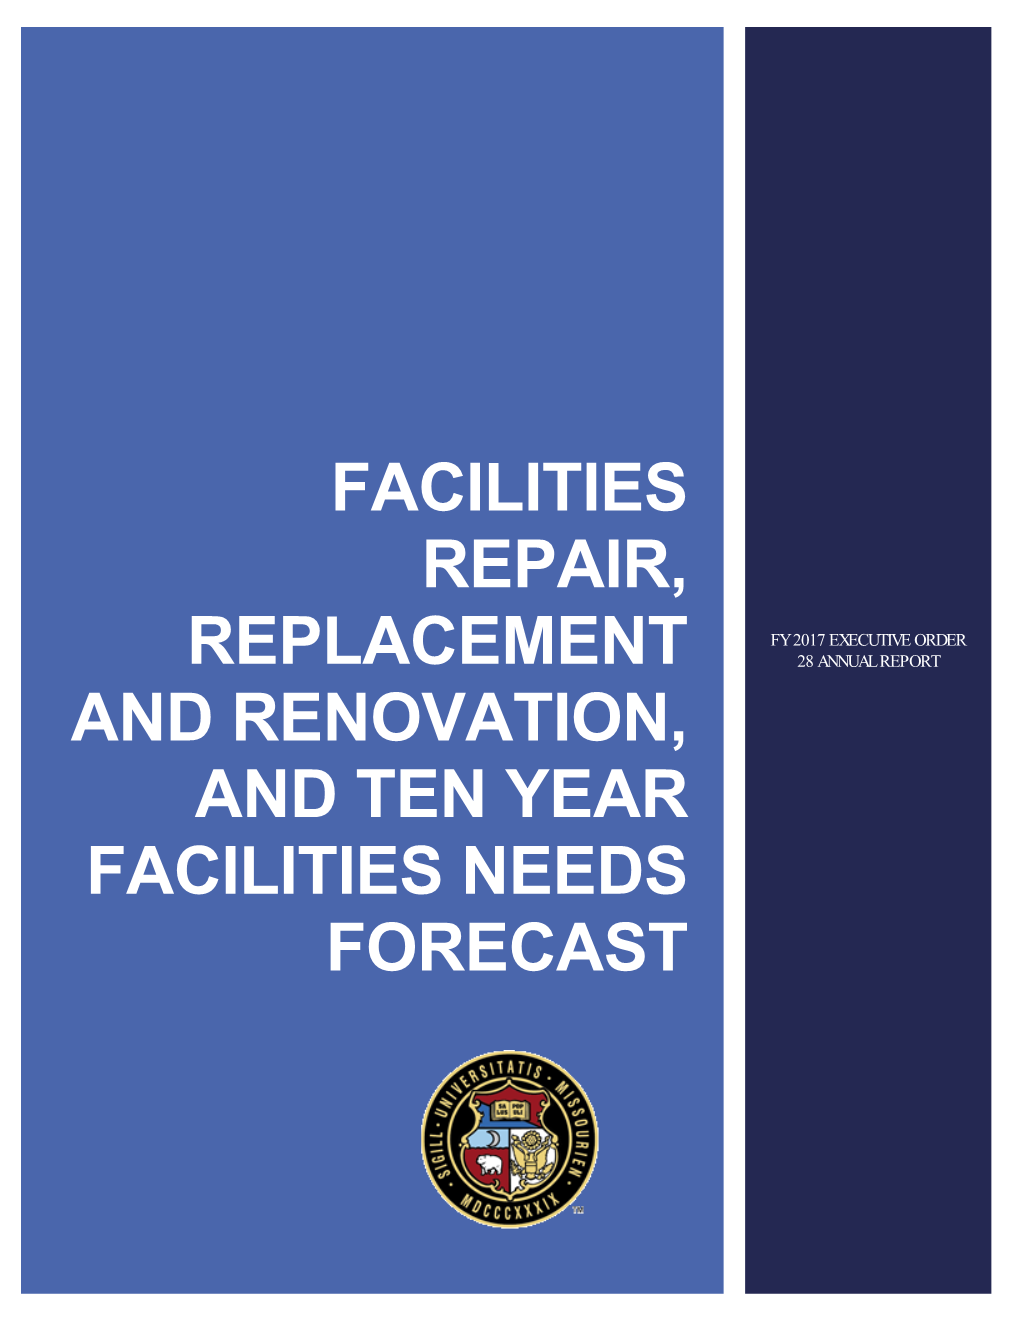 Facilities Repair, Replacement and Renovation, and Ten Year Facilities